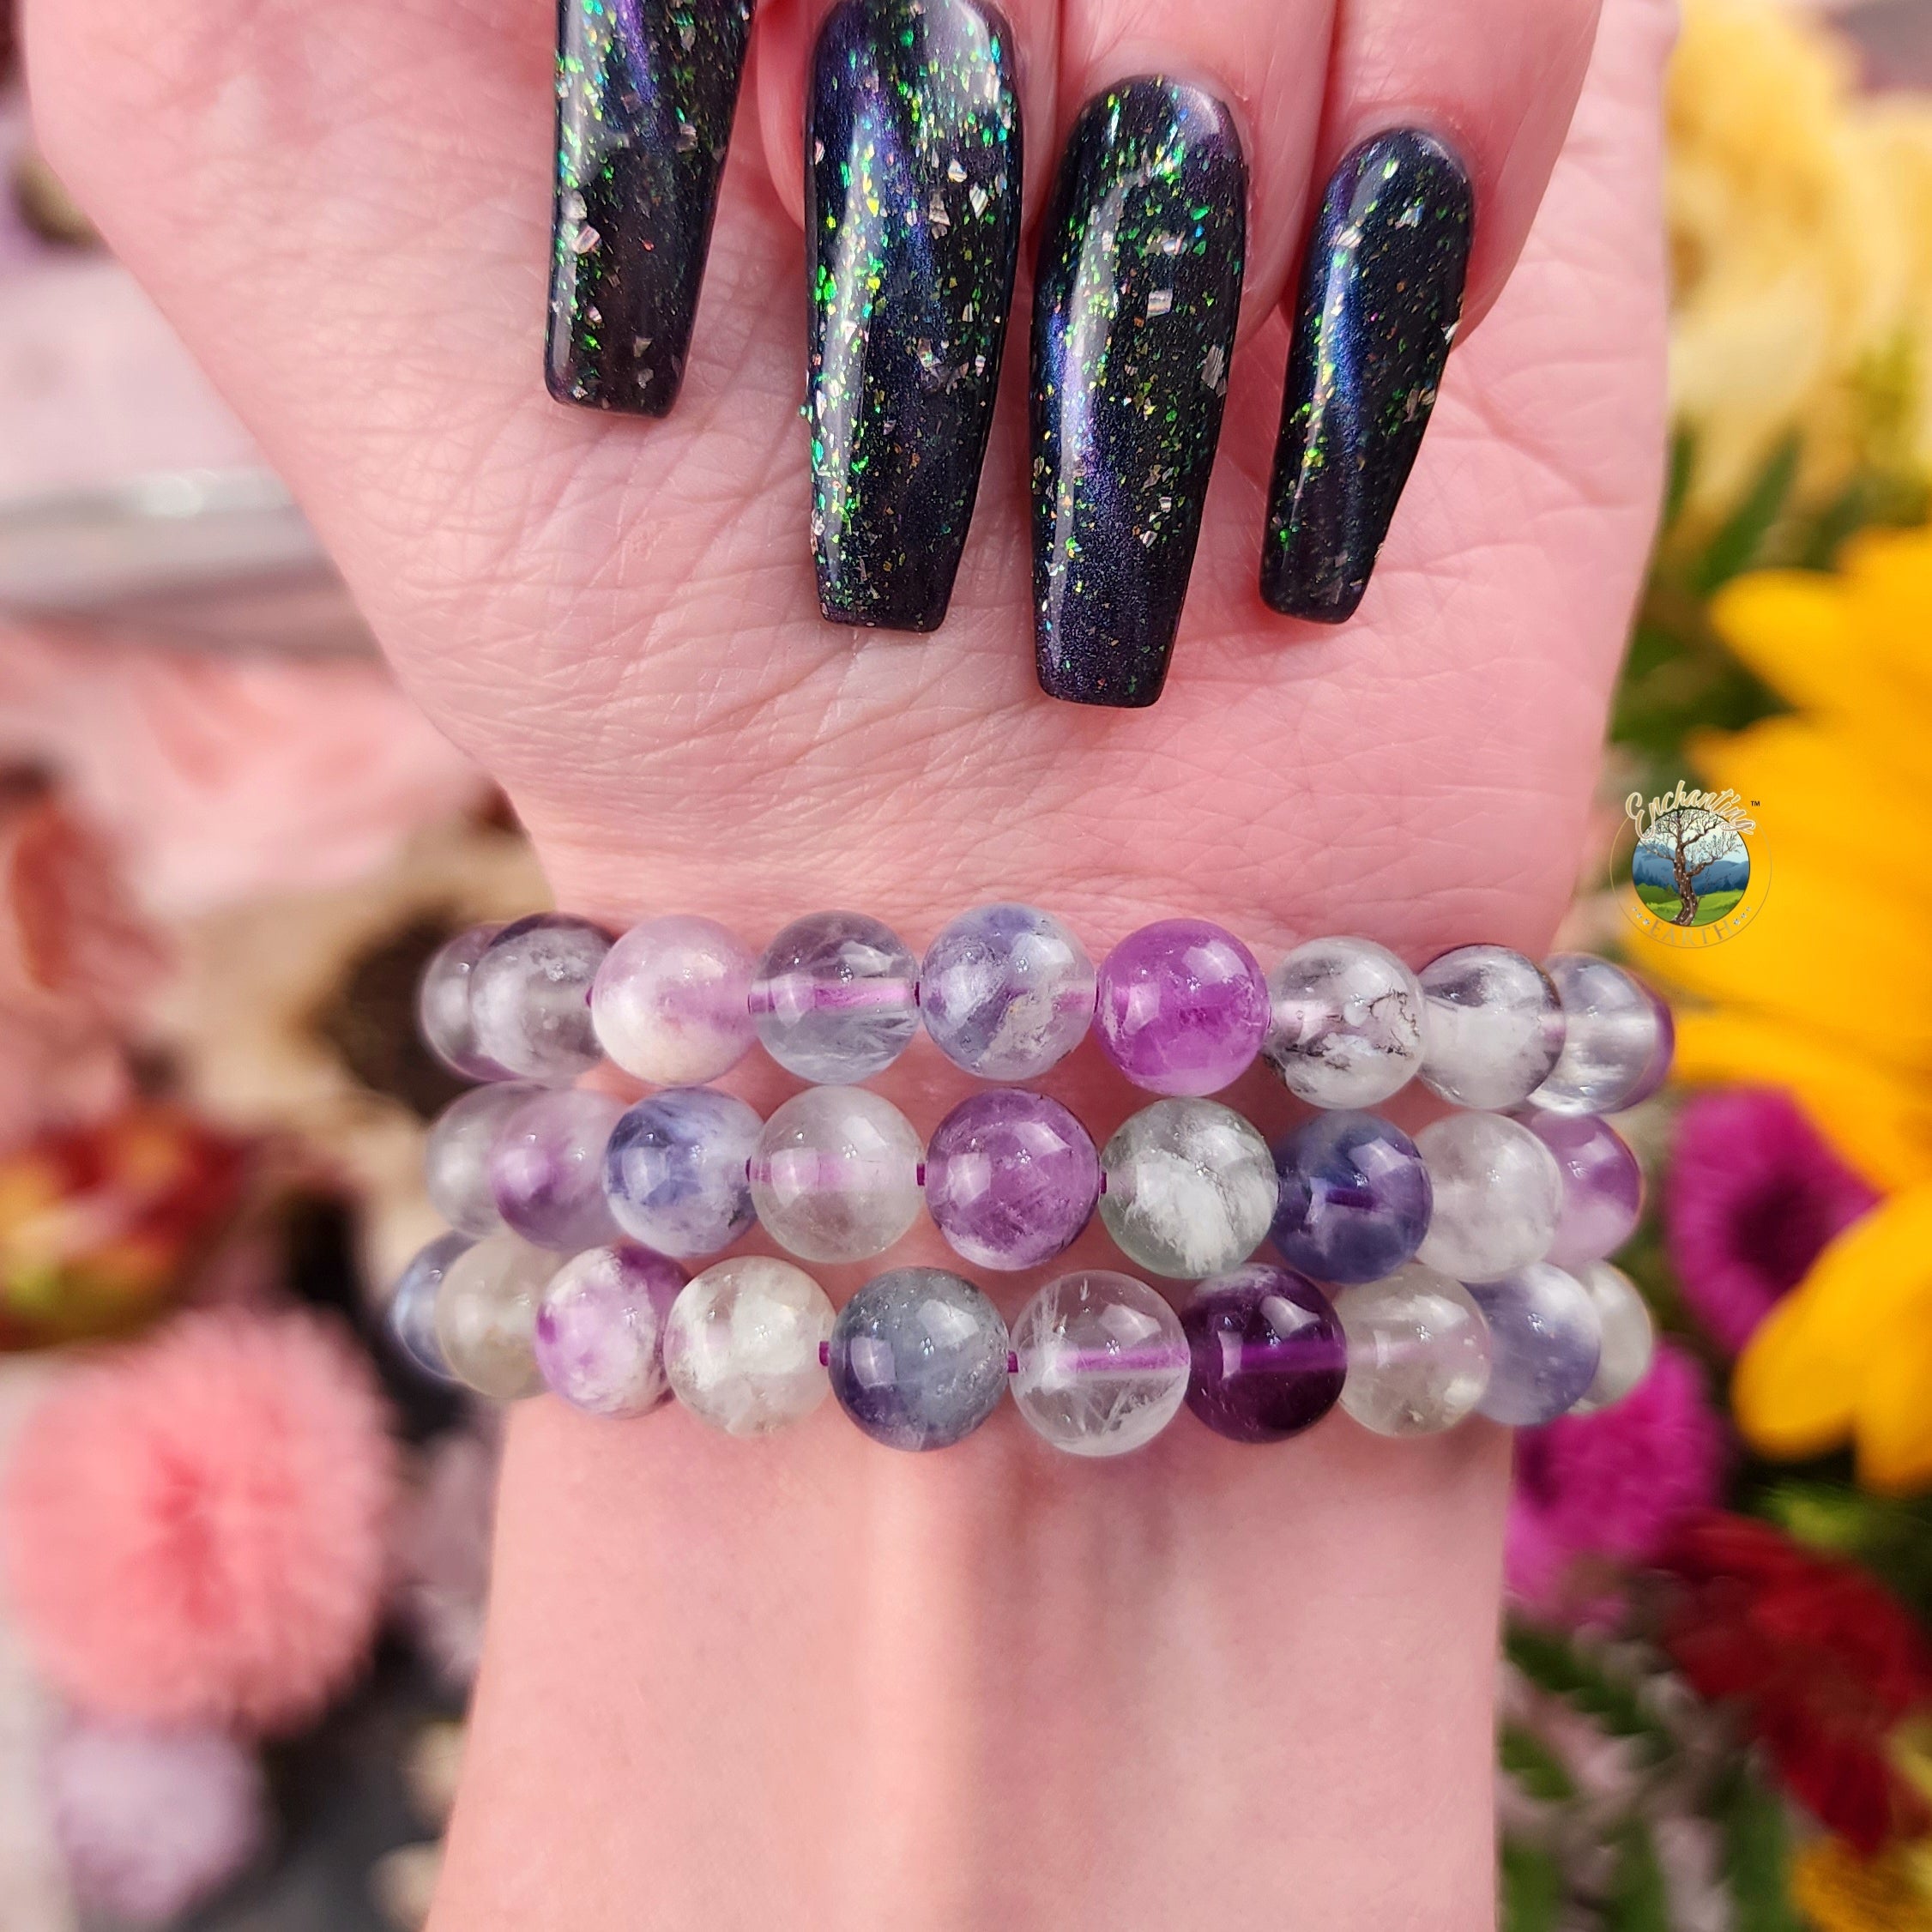 Fluorite "Feather" Bracelet for Focus and Mental Clarity